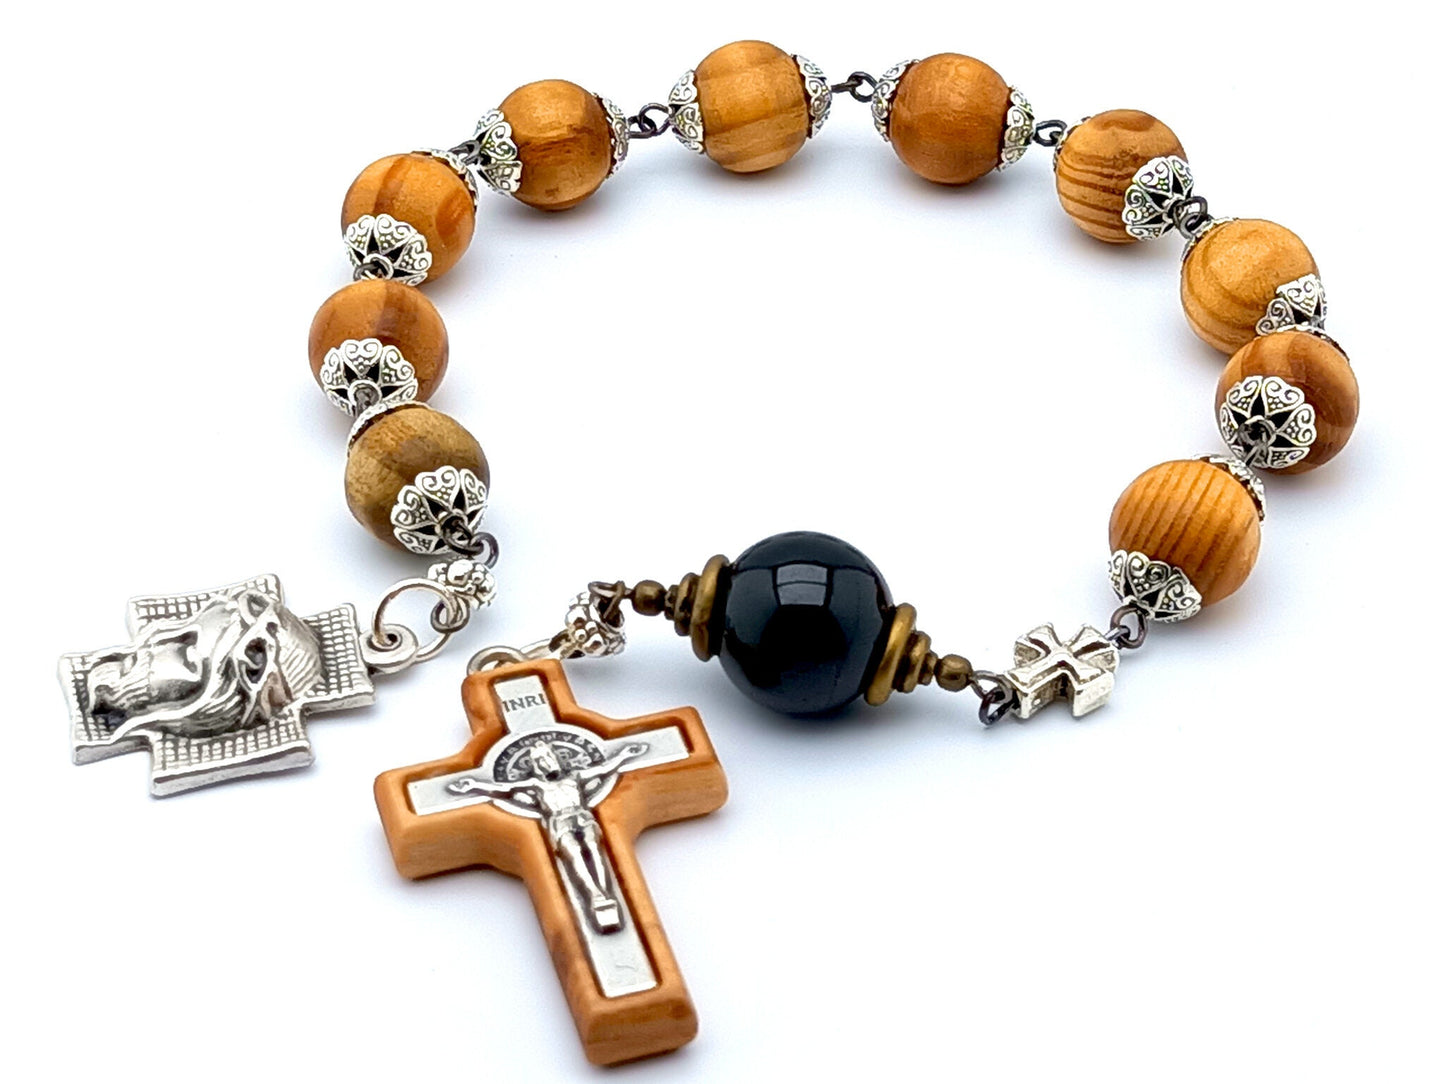 Crown of Thorns unique rosary beads single decade rosary beads with wooden and onyx beads, olive wood and silver crucifix and silver medal.